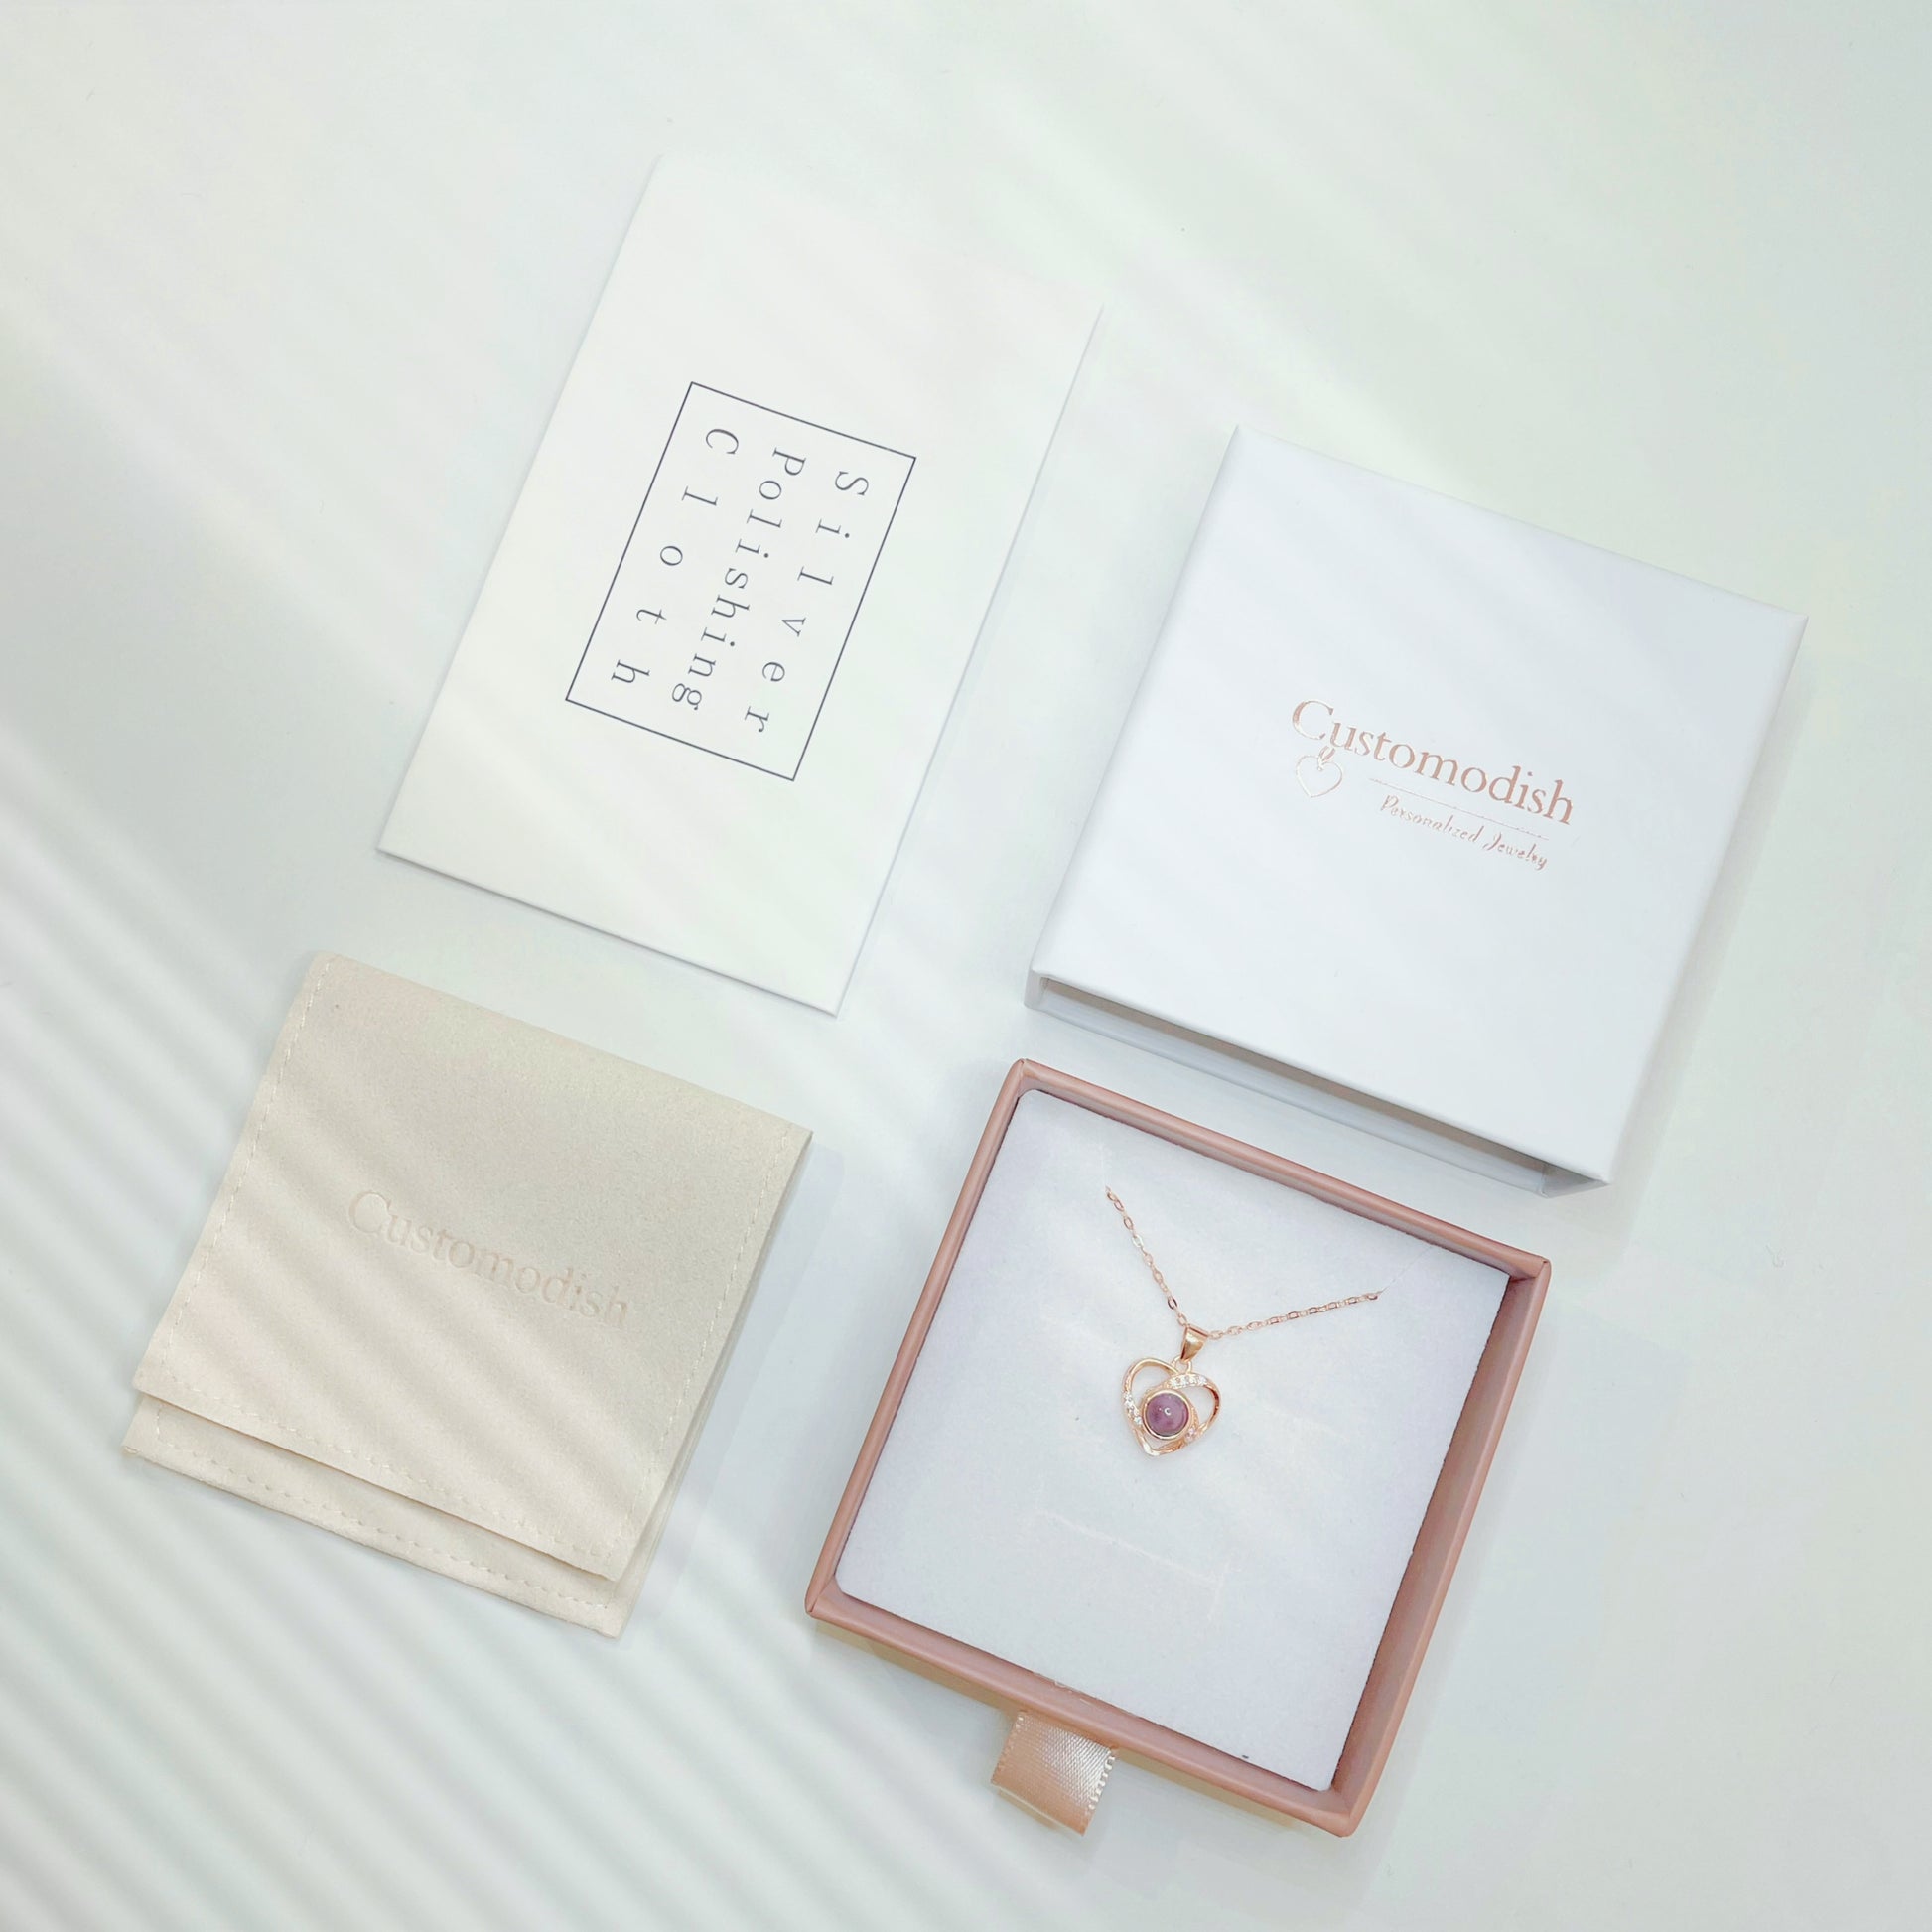 All photo projection necklace at Customodish will come in a beautiful jewelry box with a jewelry pouch and a silver polishing cloth.